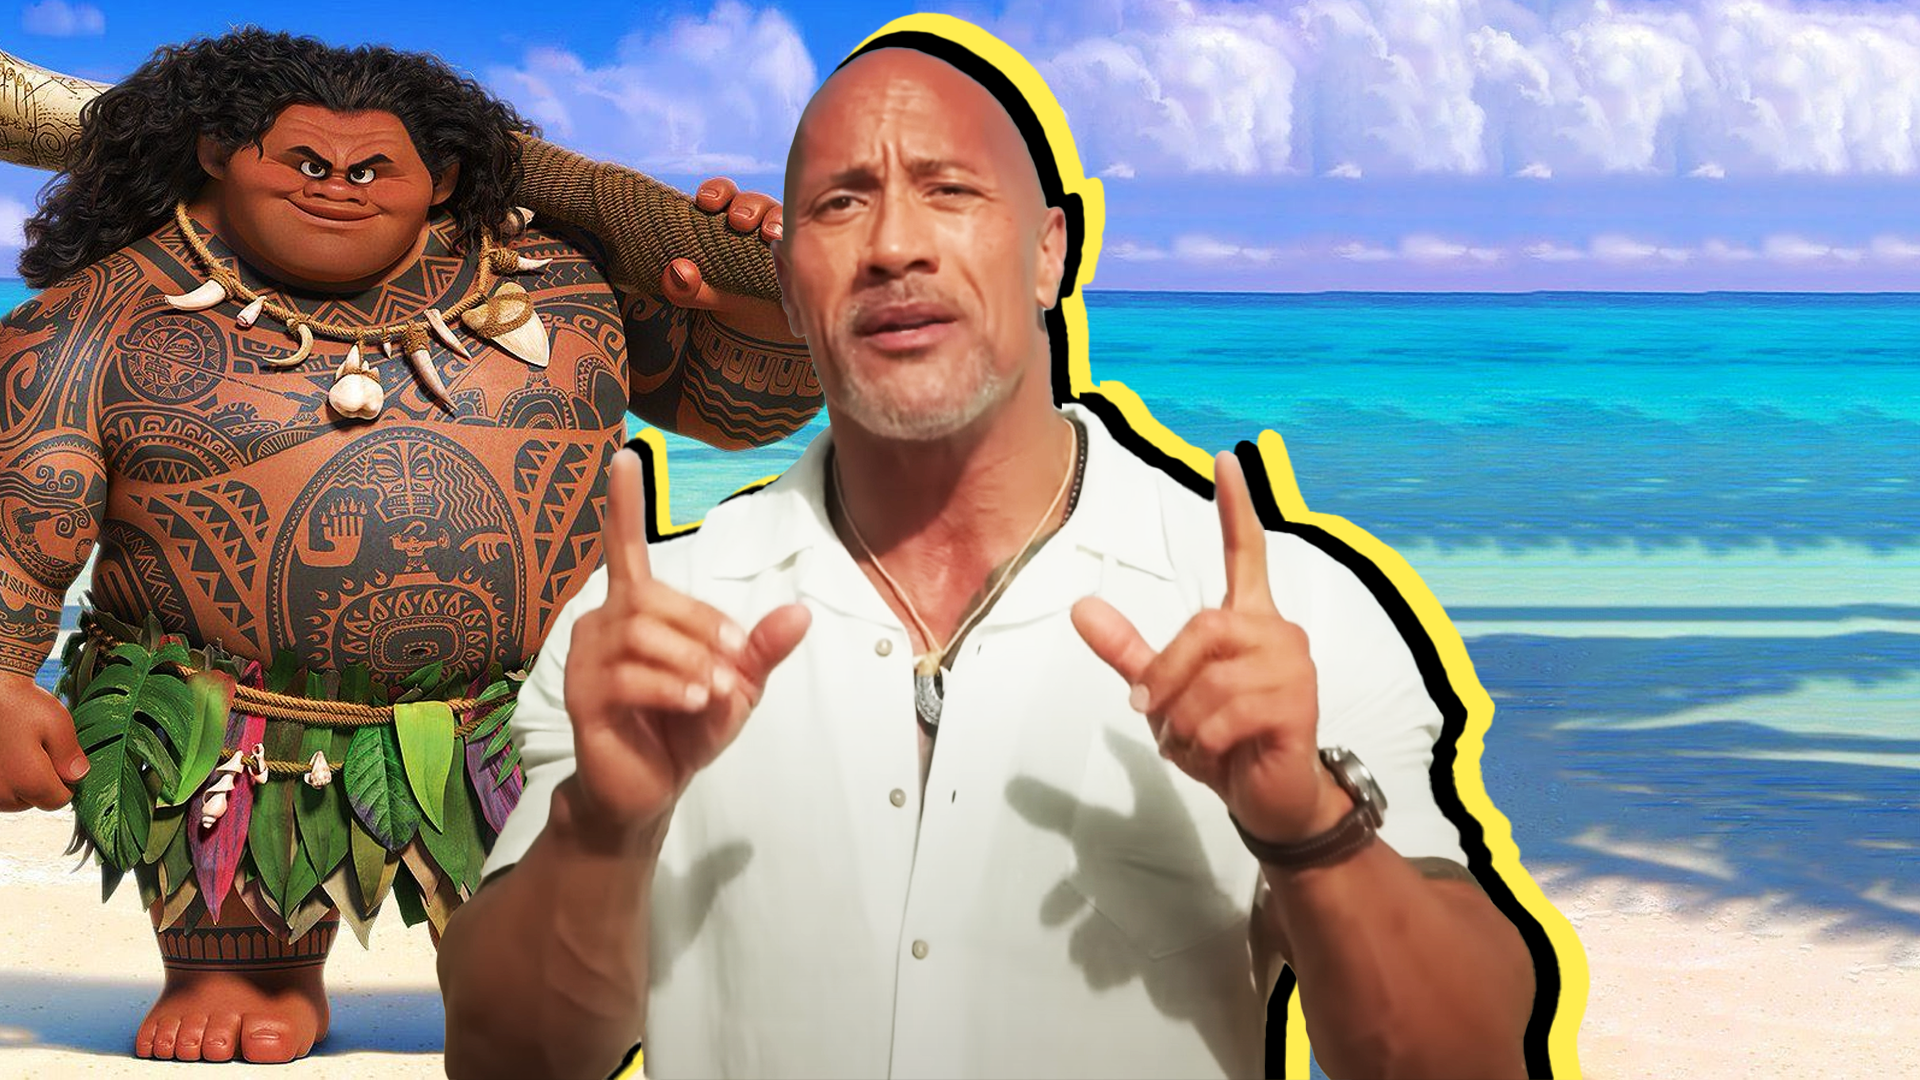 Dwayne Johnson announces live-action 'Moana' is in the works